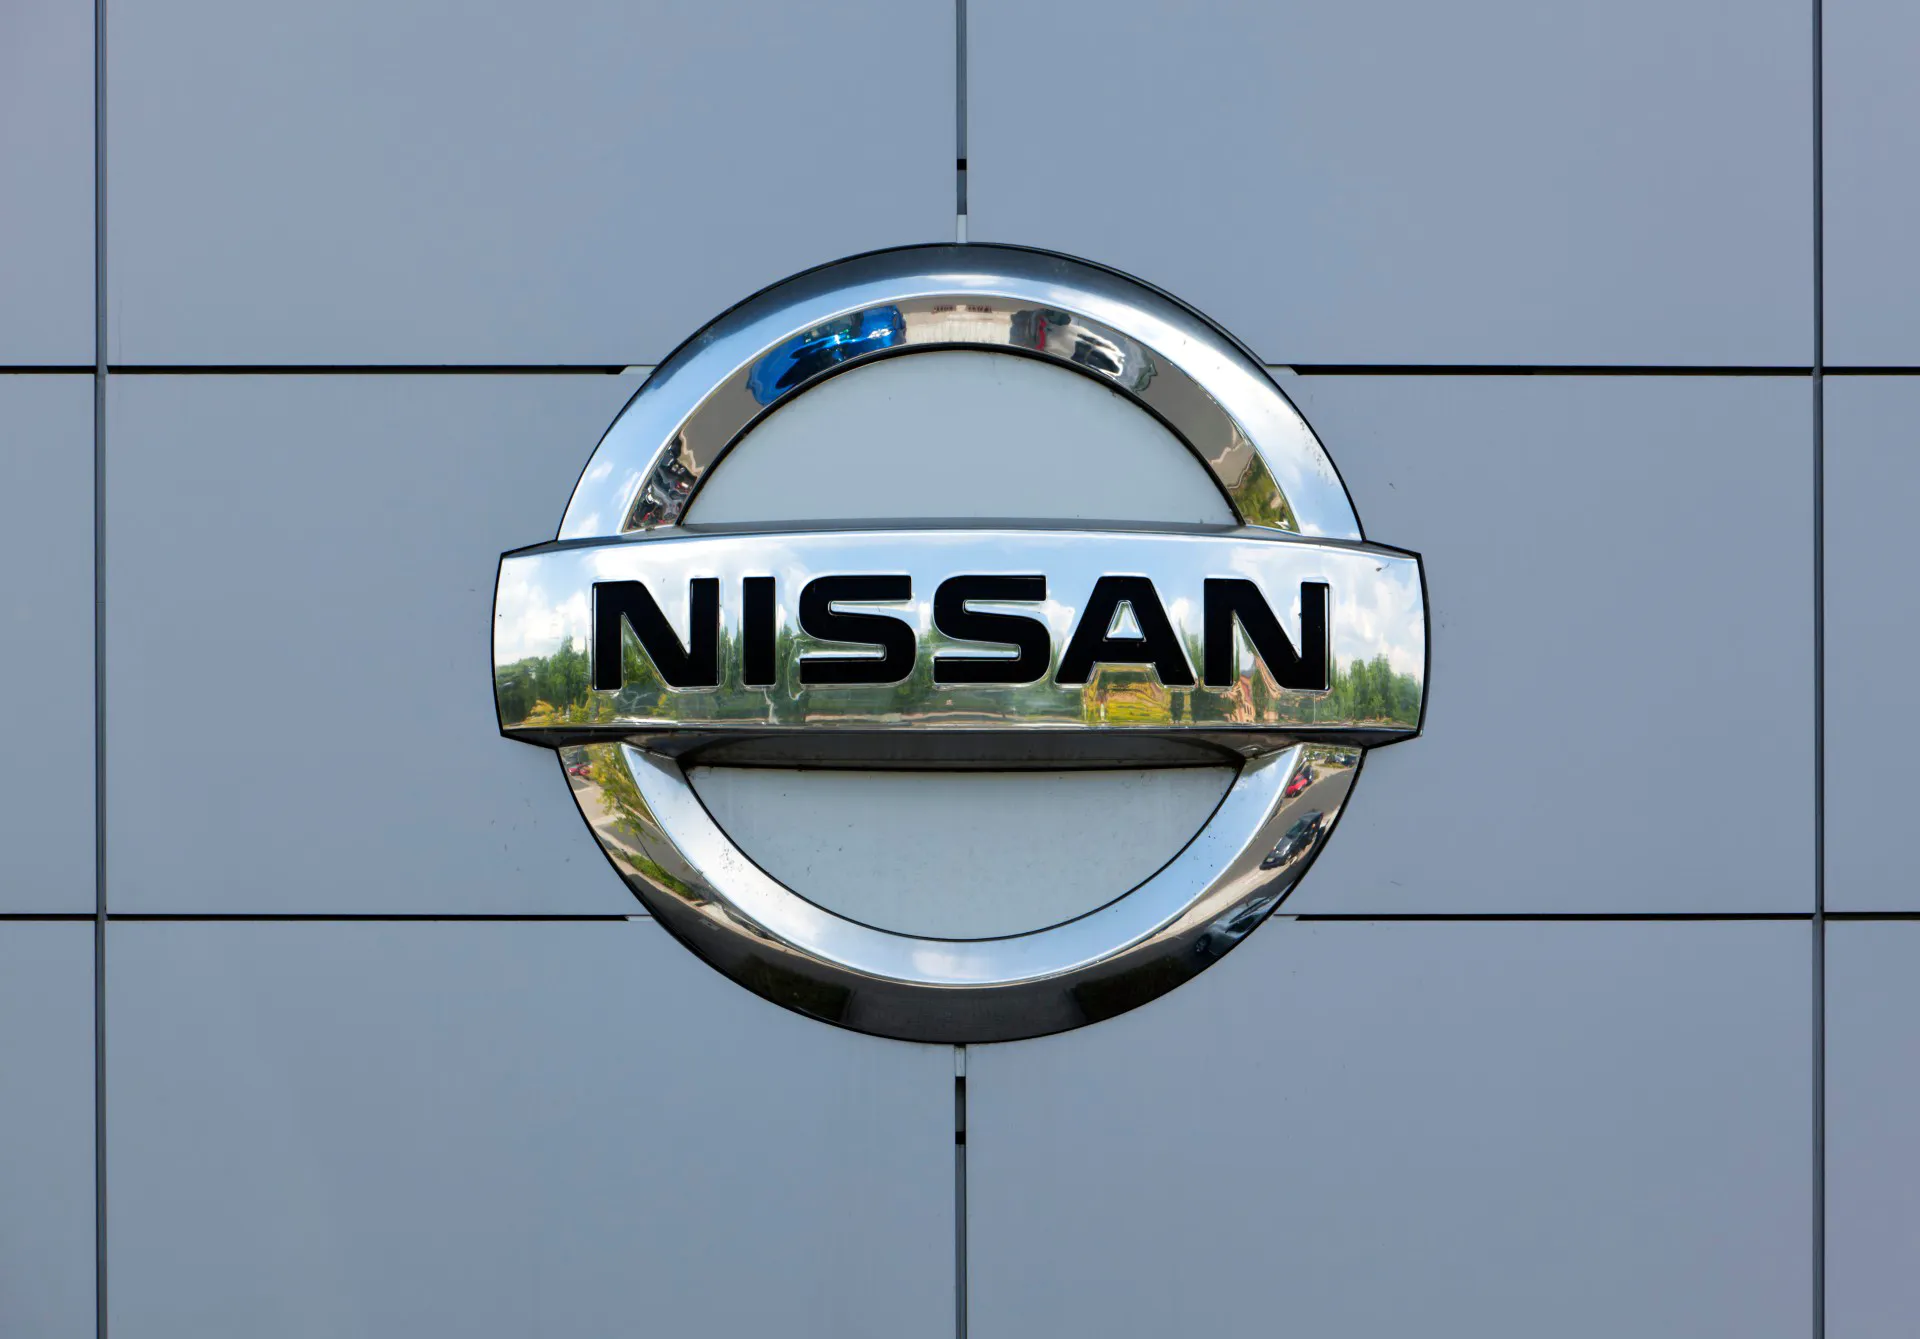 Dusseldorf, Germany - June 12, 2011: Nissan logo at the wall of car dealer's building.